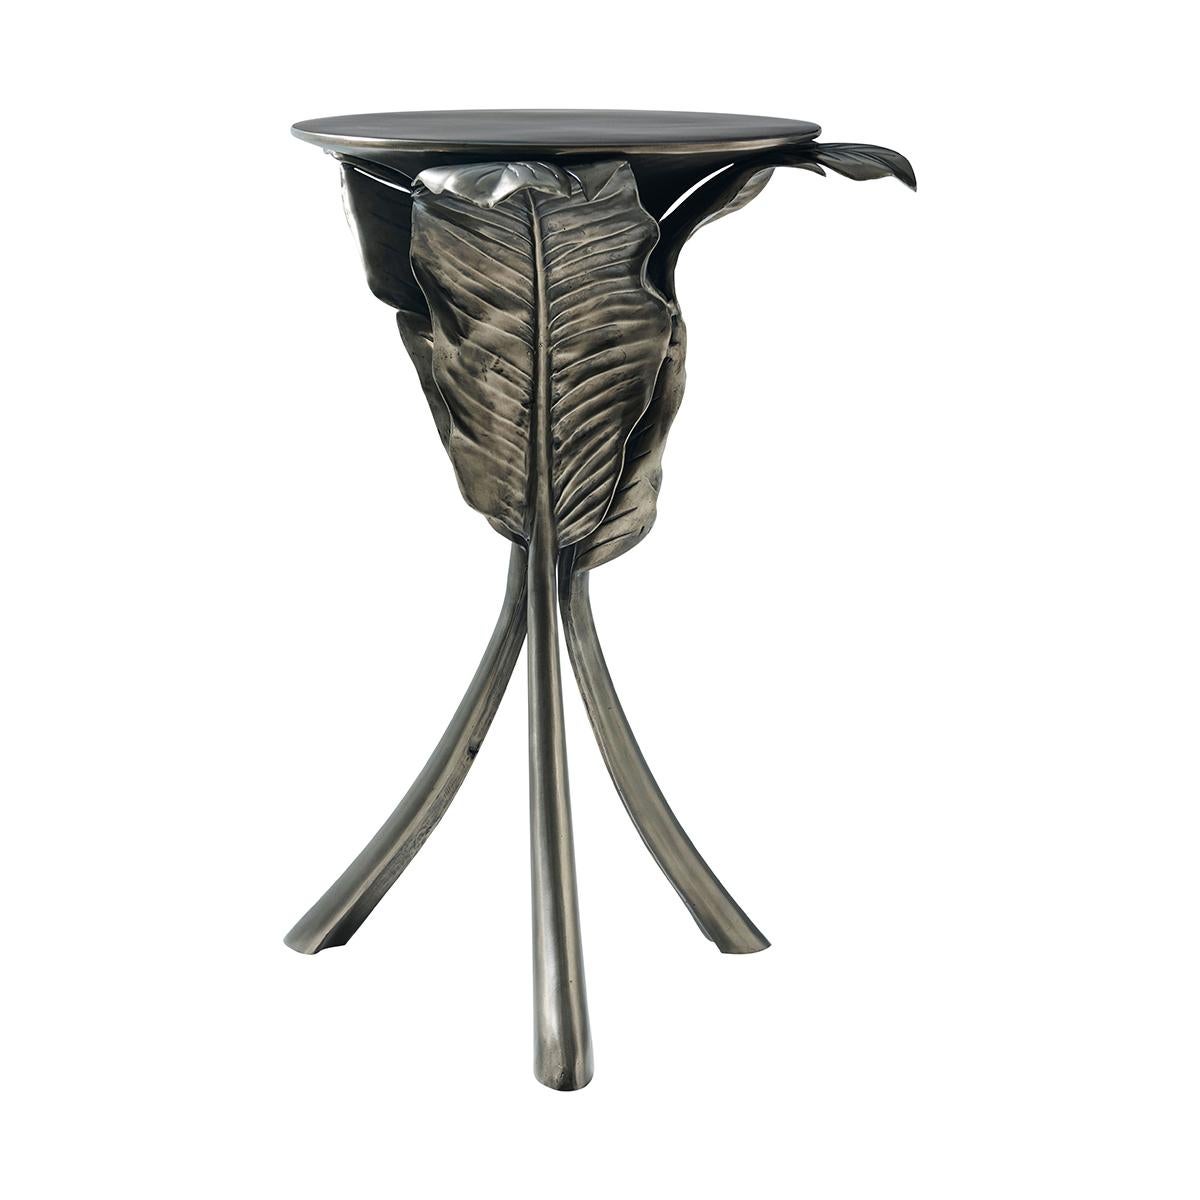 An artful blend of form and function, is a stunning sculptural statement piece. Depicting the natural elegance of banana leaves, this piece is hand cast and finished in the Volcanic finish.

Dimensions: 17